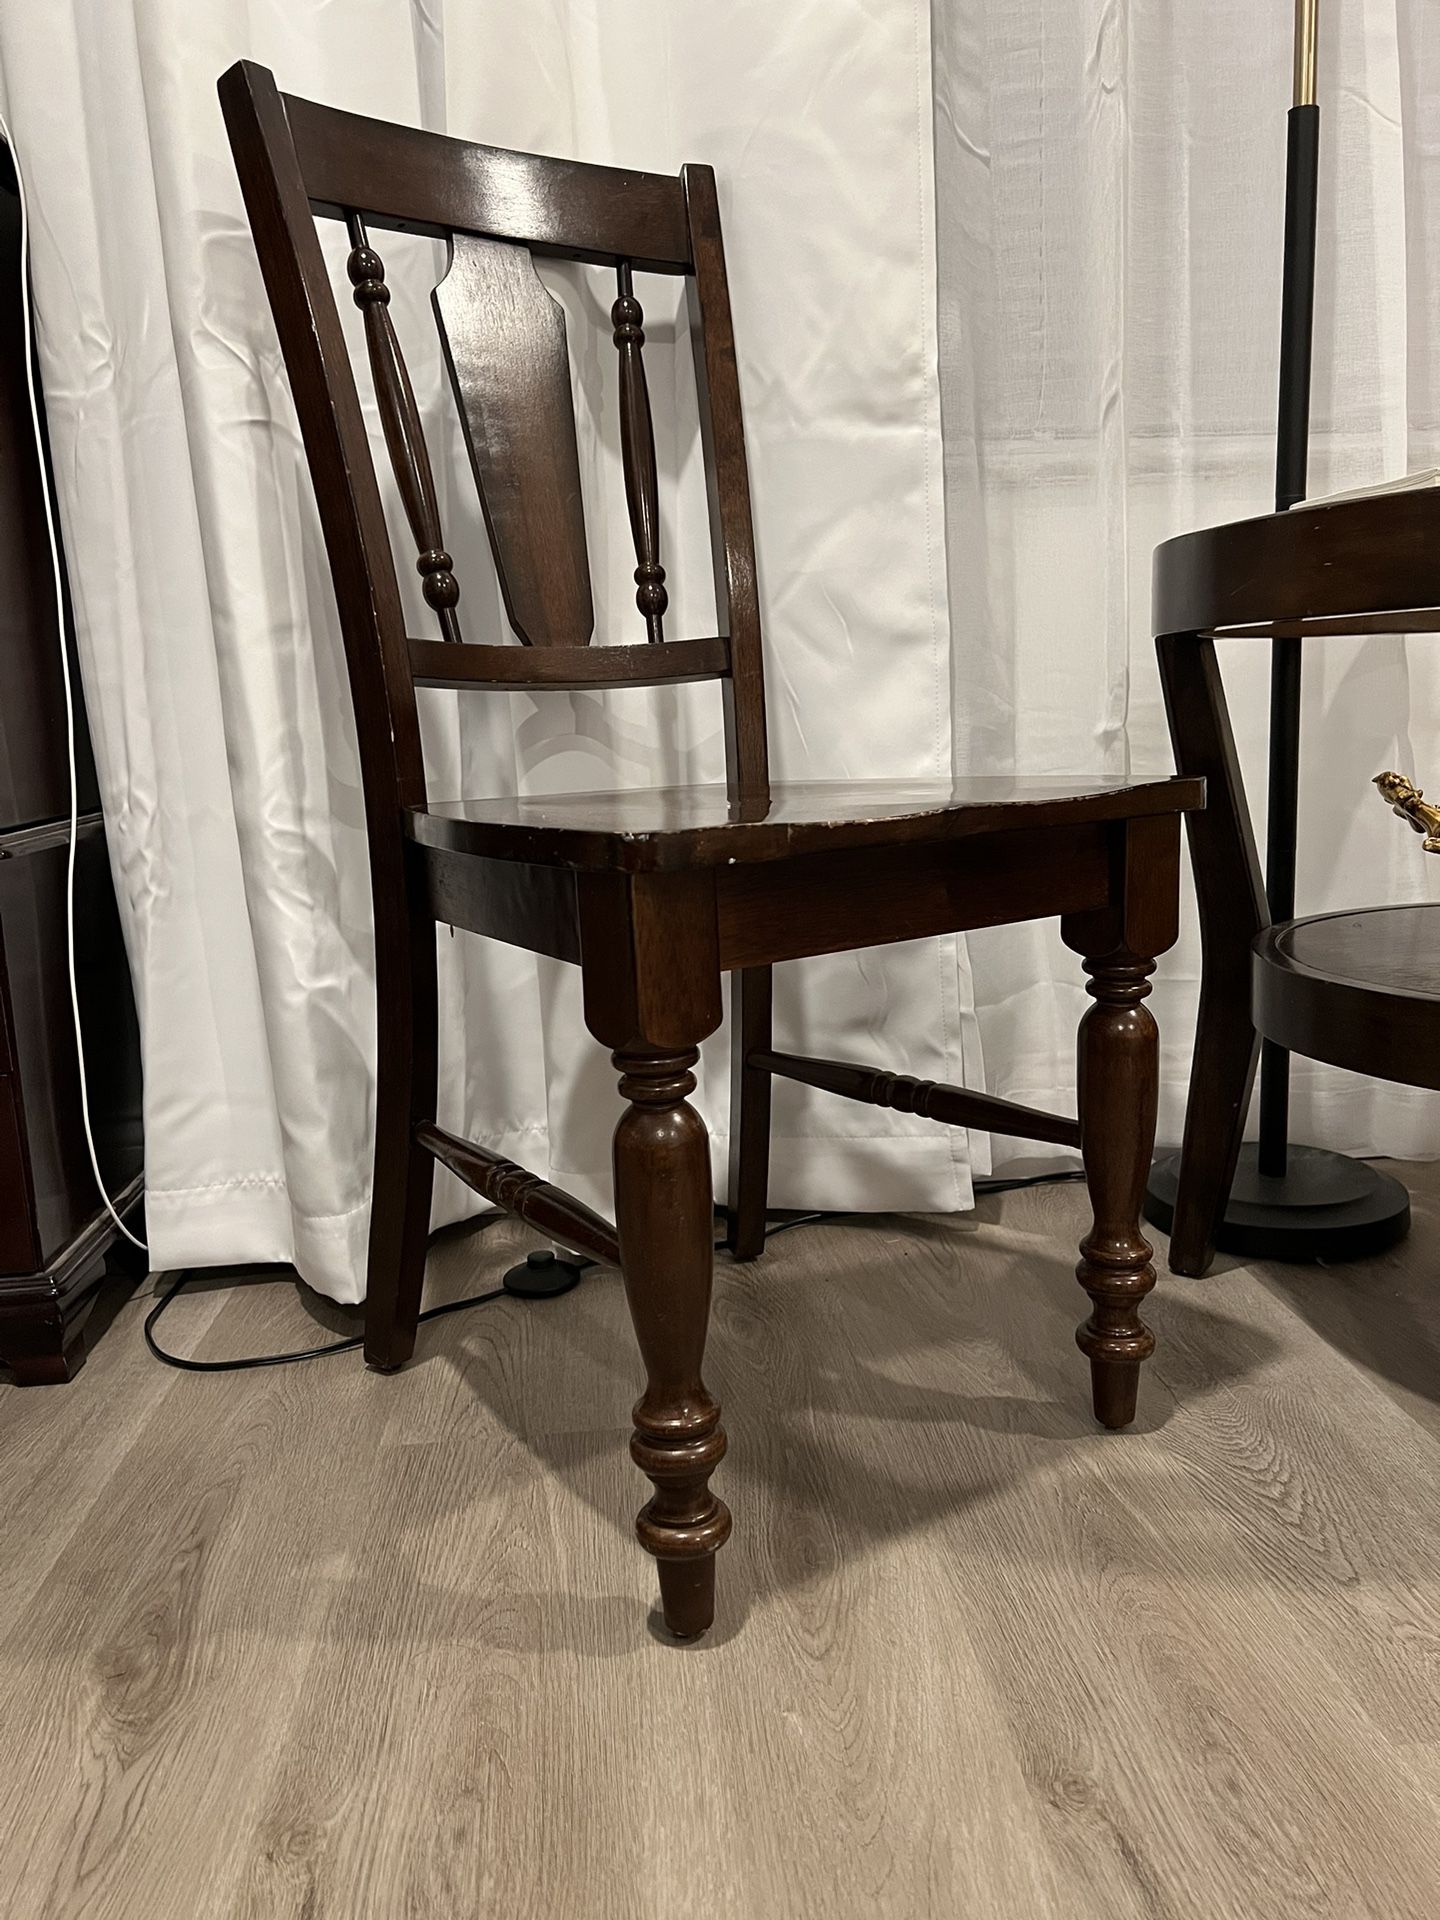 4 Identical Solid Wood Chairs Mahogany Finish 